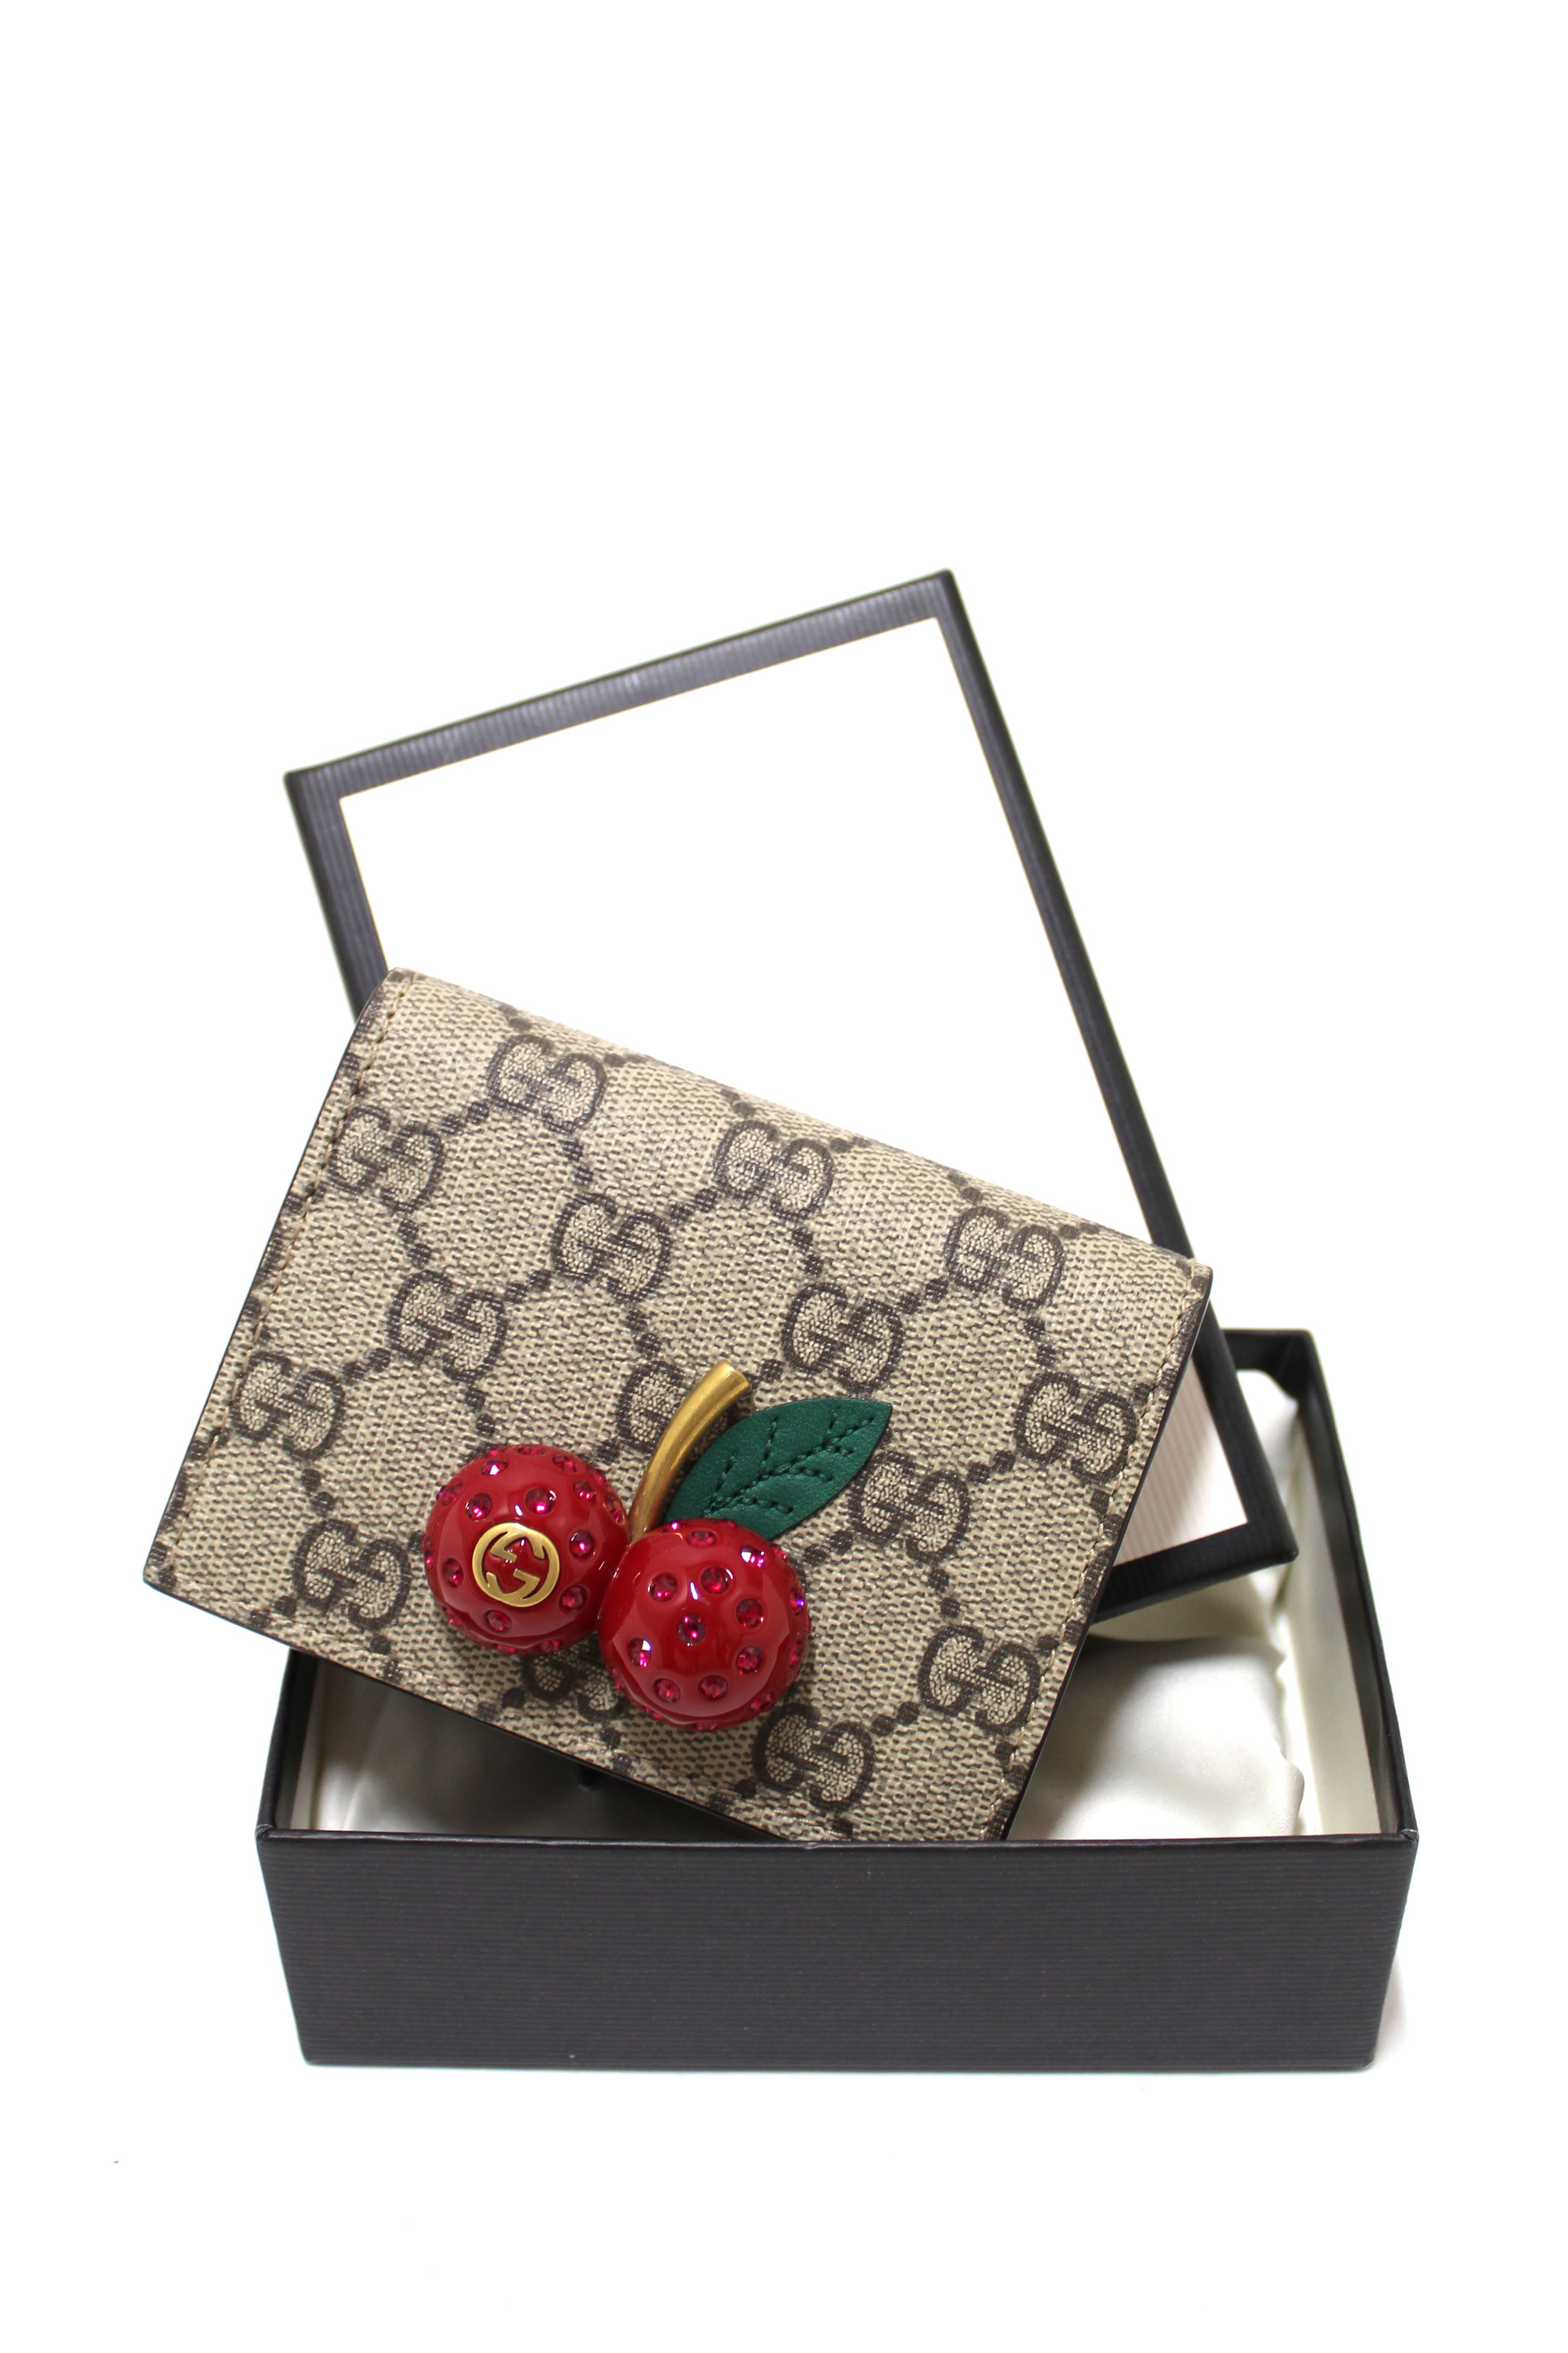 Authentic NEW Gucci GG Supreme Cherries Card Case Wallet